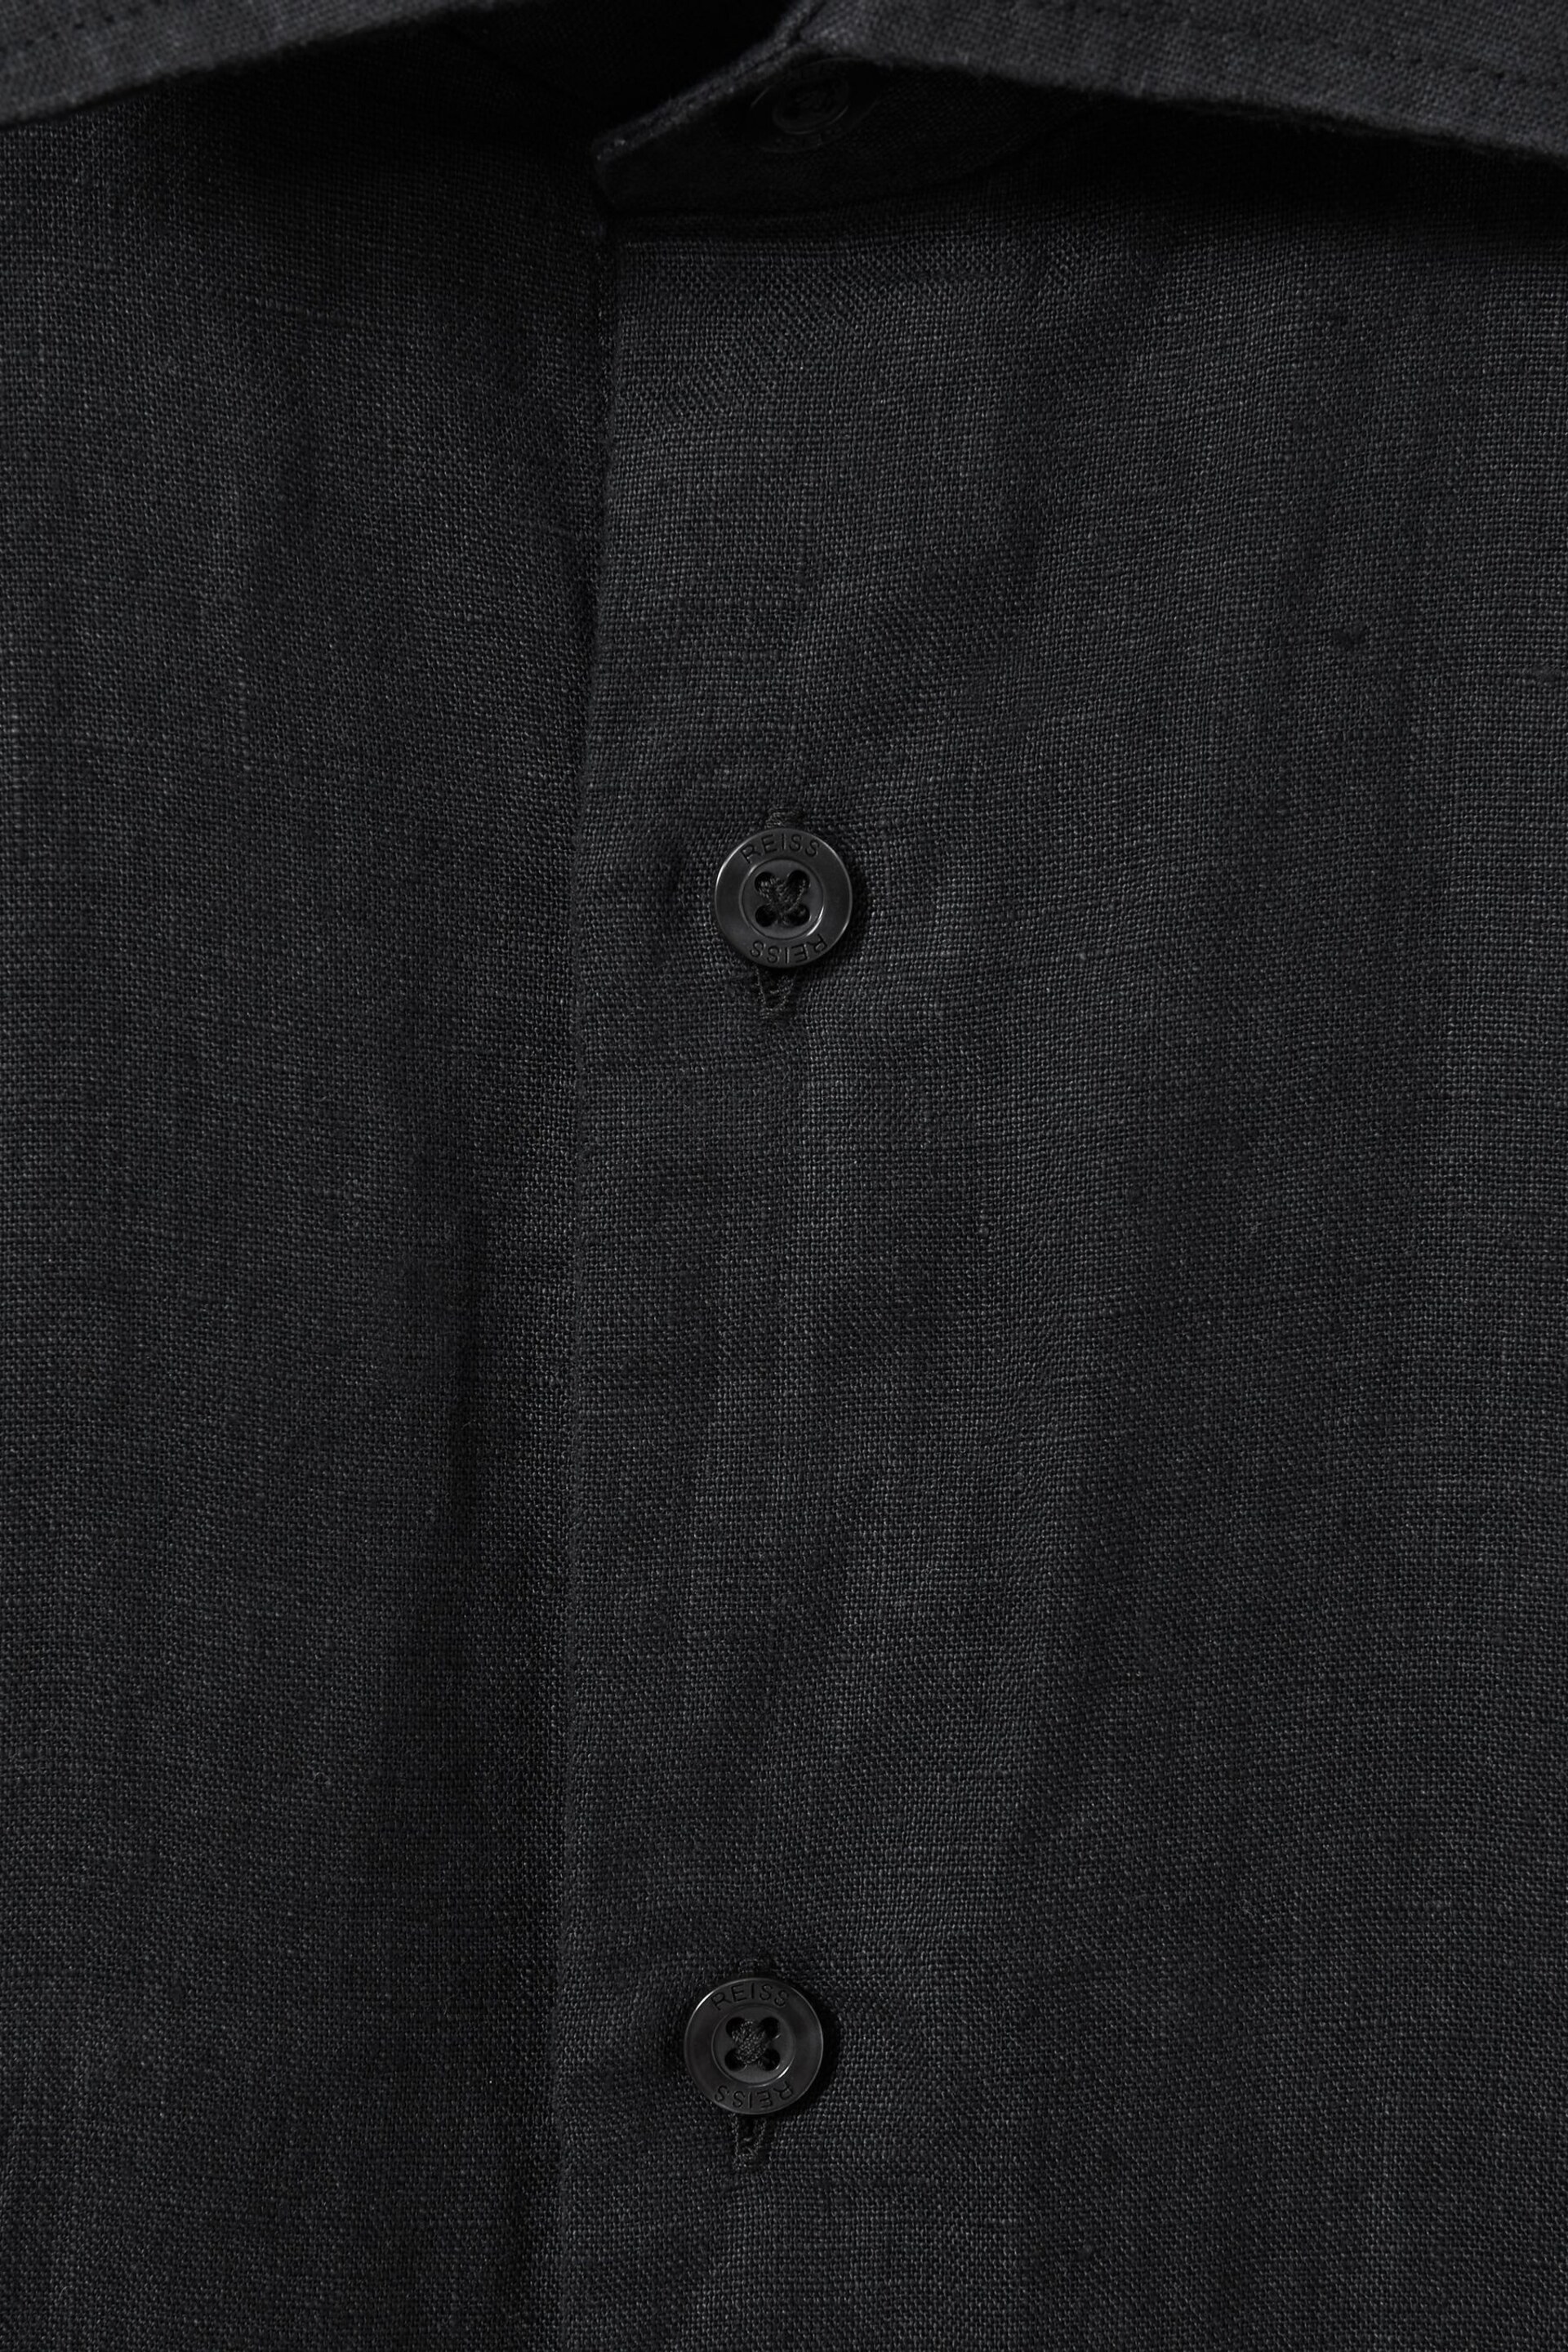 Reiss Black Holiday Slim Fit Linen Shirt - Image 5 of 5